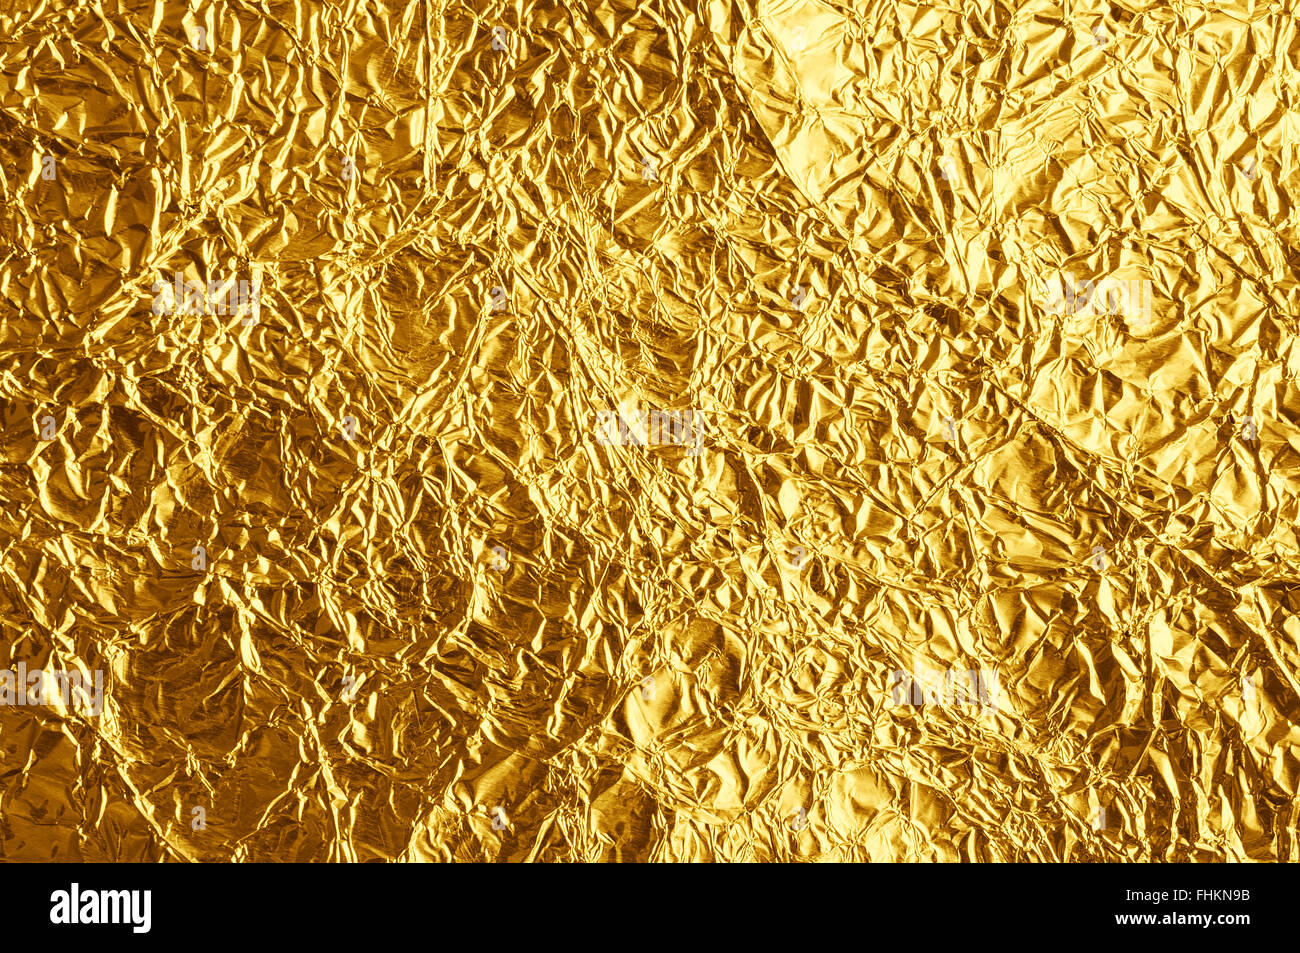 https://c8.alamy.com/comp/FHKN9B/shiny-gold-foil-texture-for-background-FHKN9B.jpg